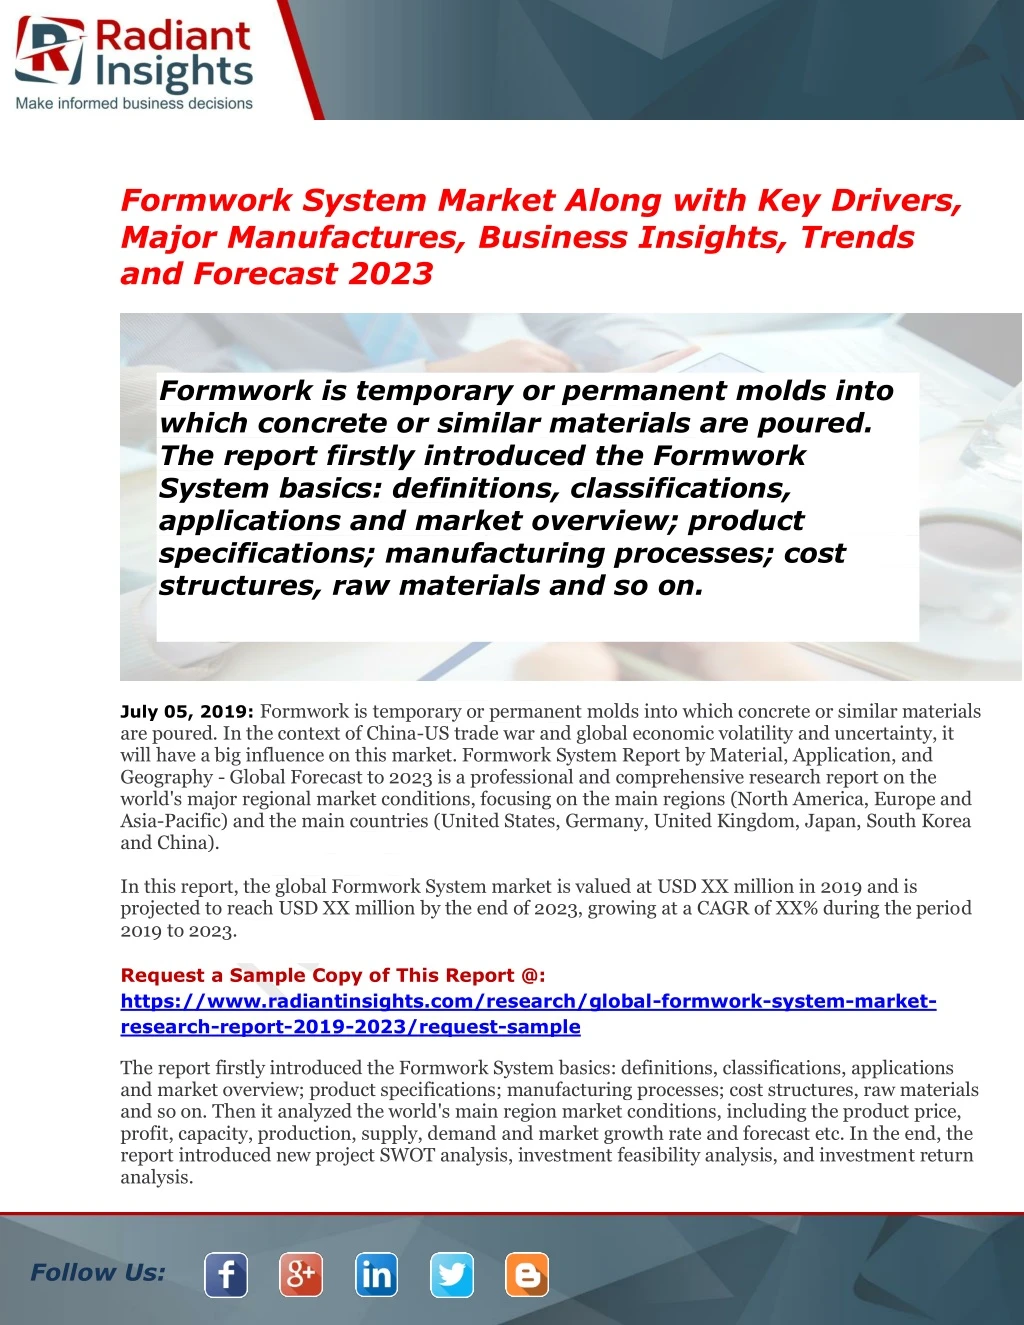 formwork system market along with key drivers